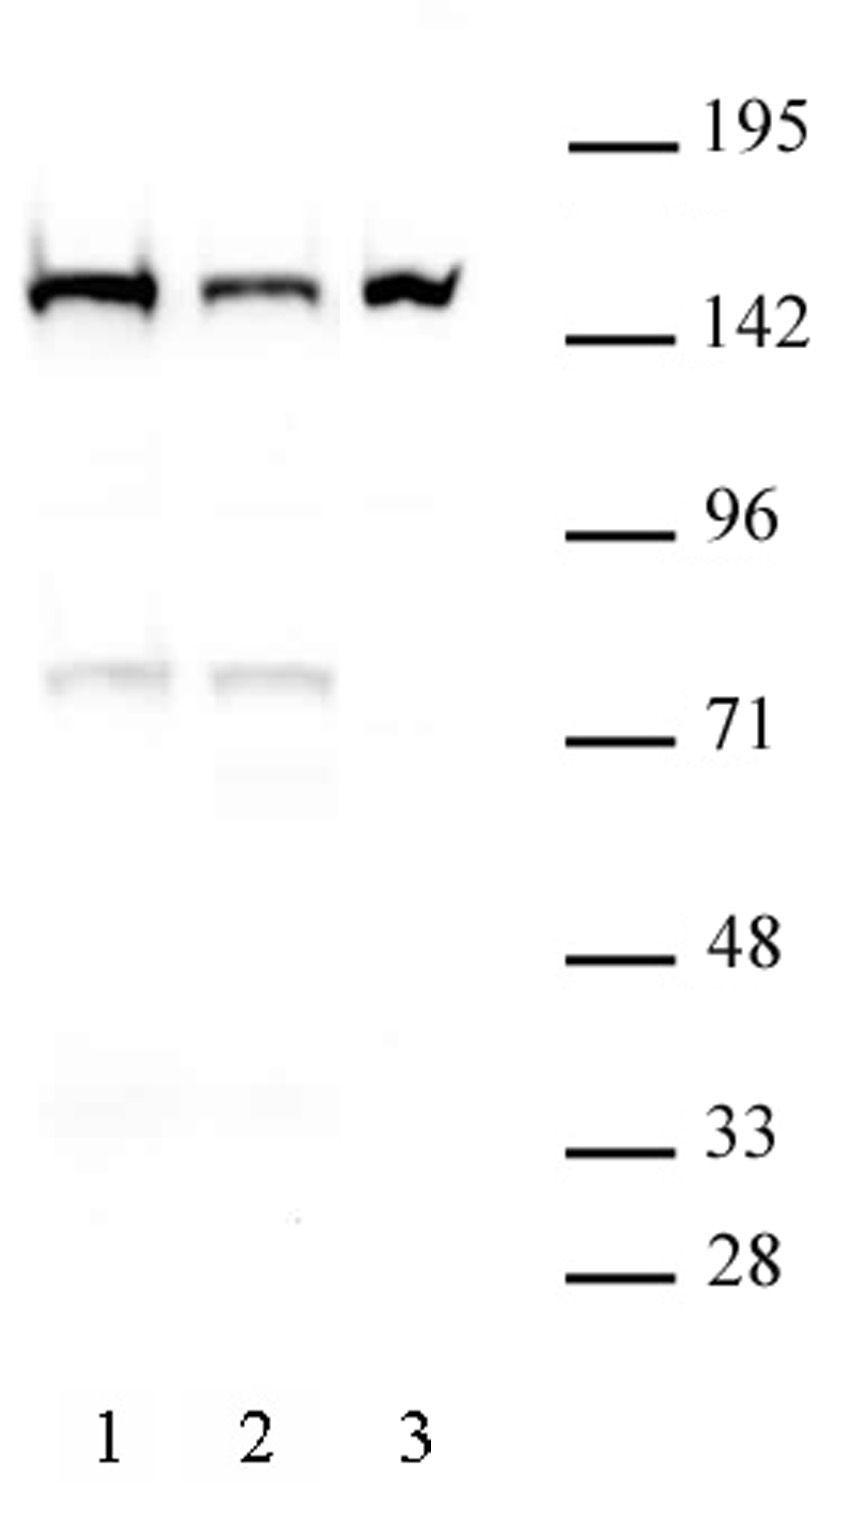 DHX9 antibody (mAb) (Clone 8E3) tested by Western blot. DHX9 antibody detection by Western blot. The analysis was performed using 30 ug of either NIH-3T3 nuclear extract (lane 1), NIH-3T3 cytoplasmic extract (lane 2), or HeLa nuclear extract (lane 3) and DHX9 antibody (mAb) at a 2 ug/ml dilution.